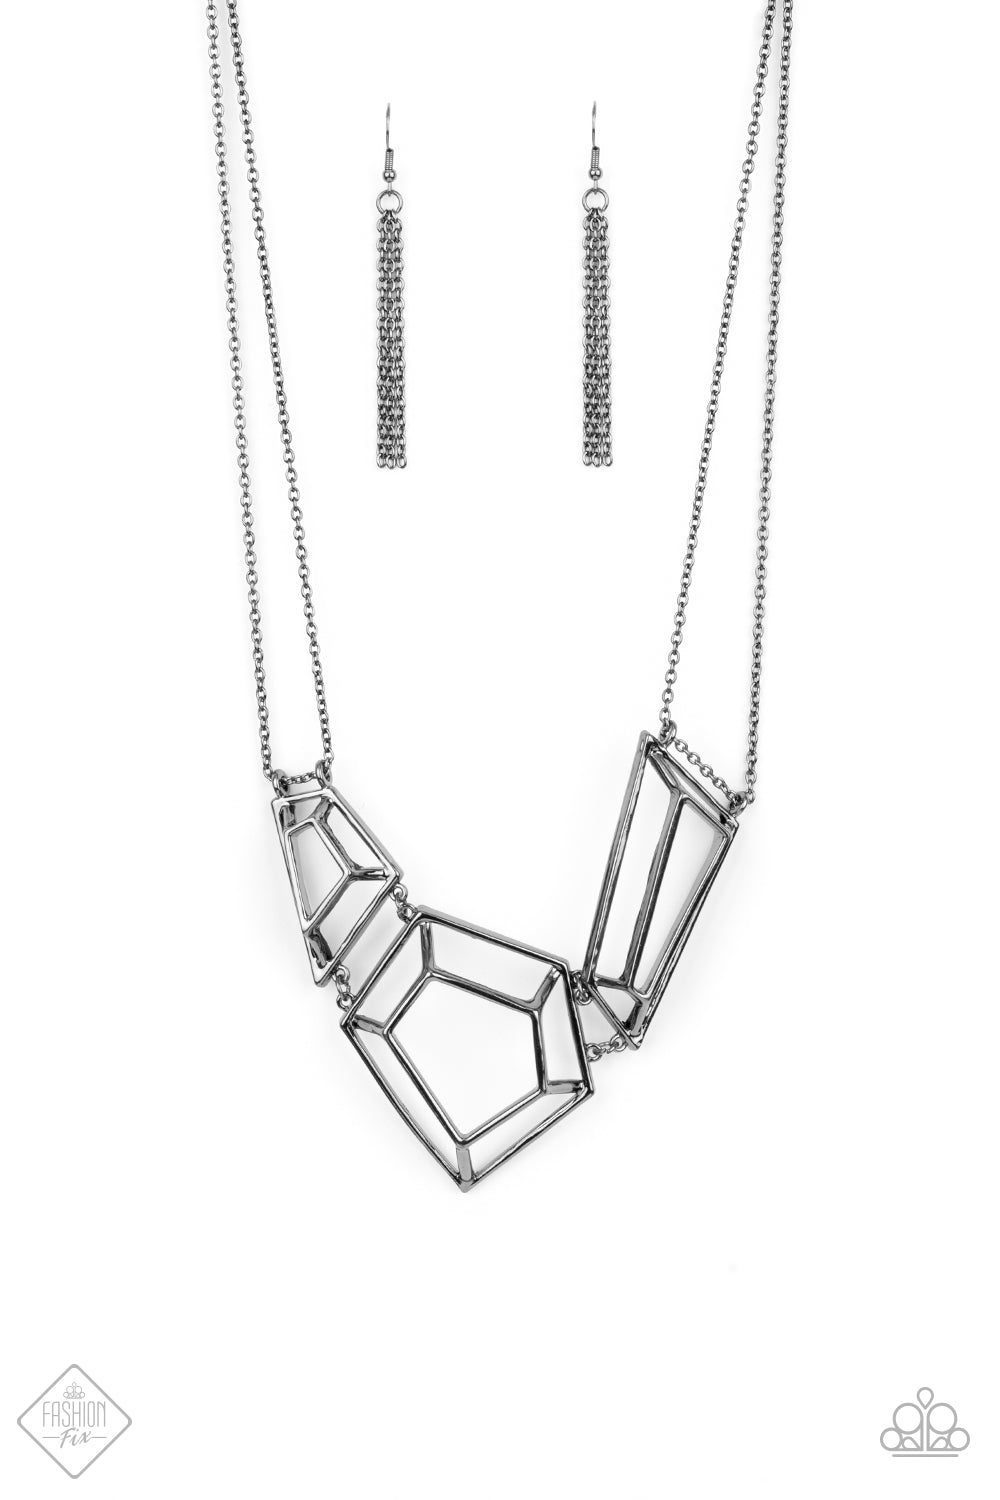 unmetal bars connect into edgy 3-dimensional frames